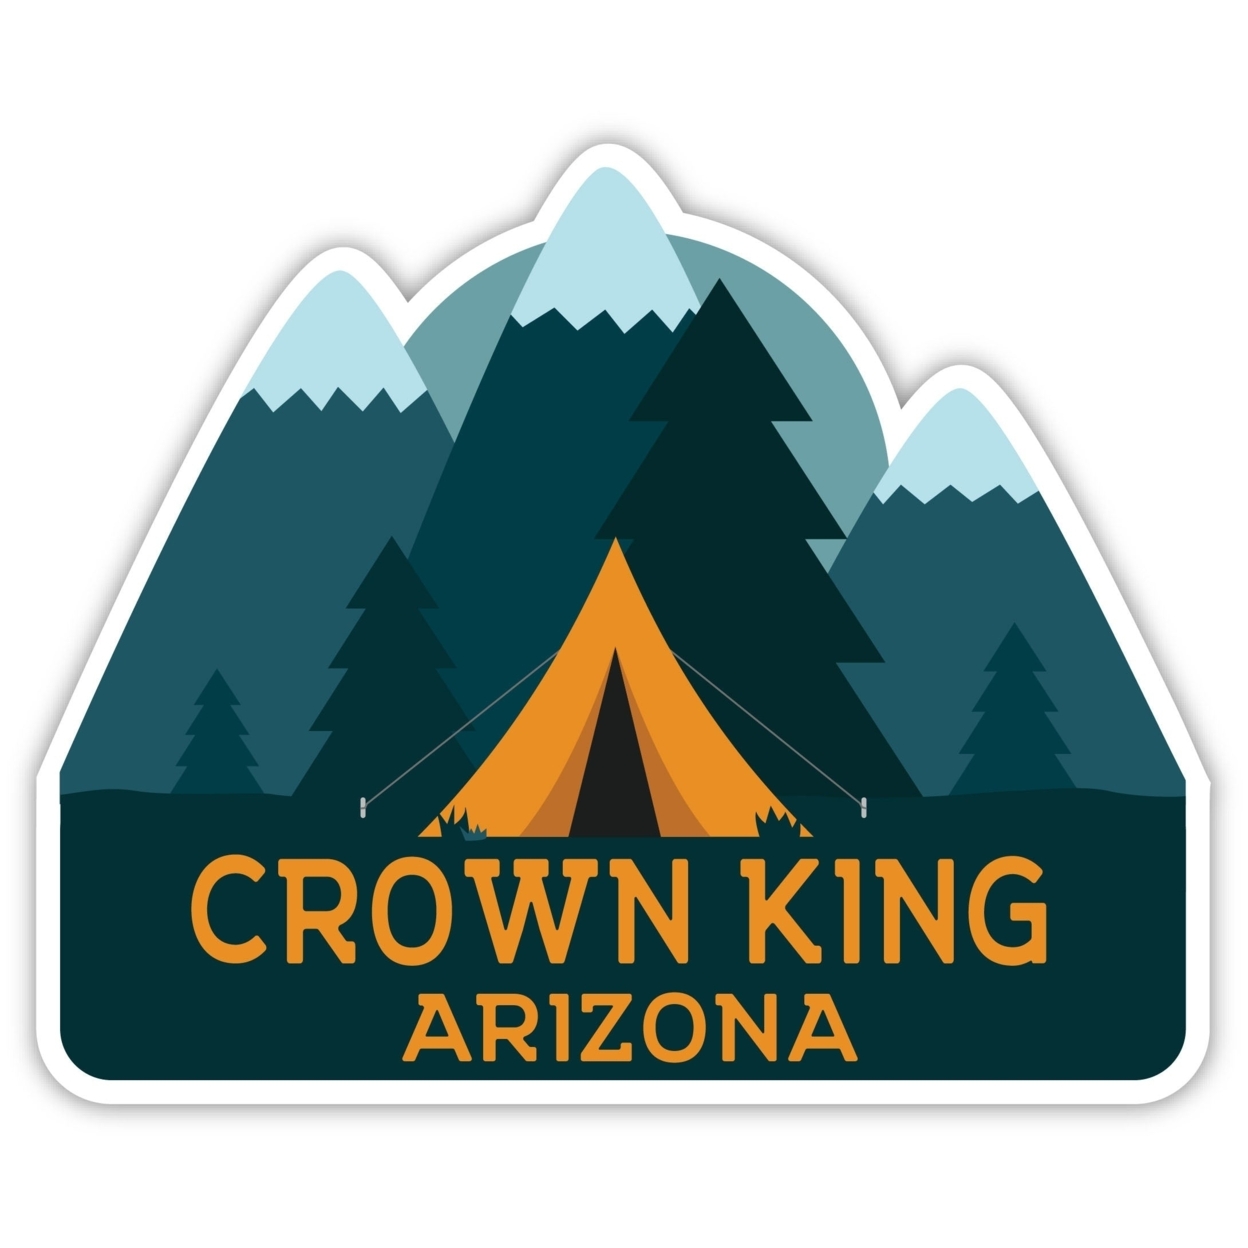 Crown King Arizona Souvenir Decorative Stickers (Choose Theme And Size) - 4-Pack, 12-Inch, Tent